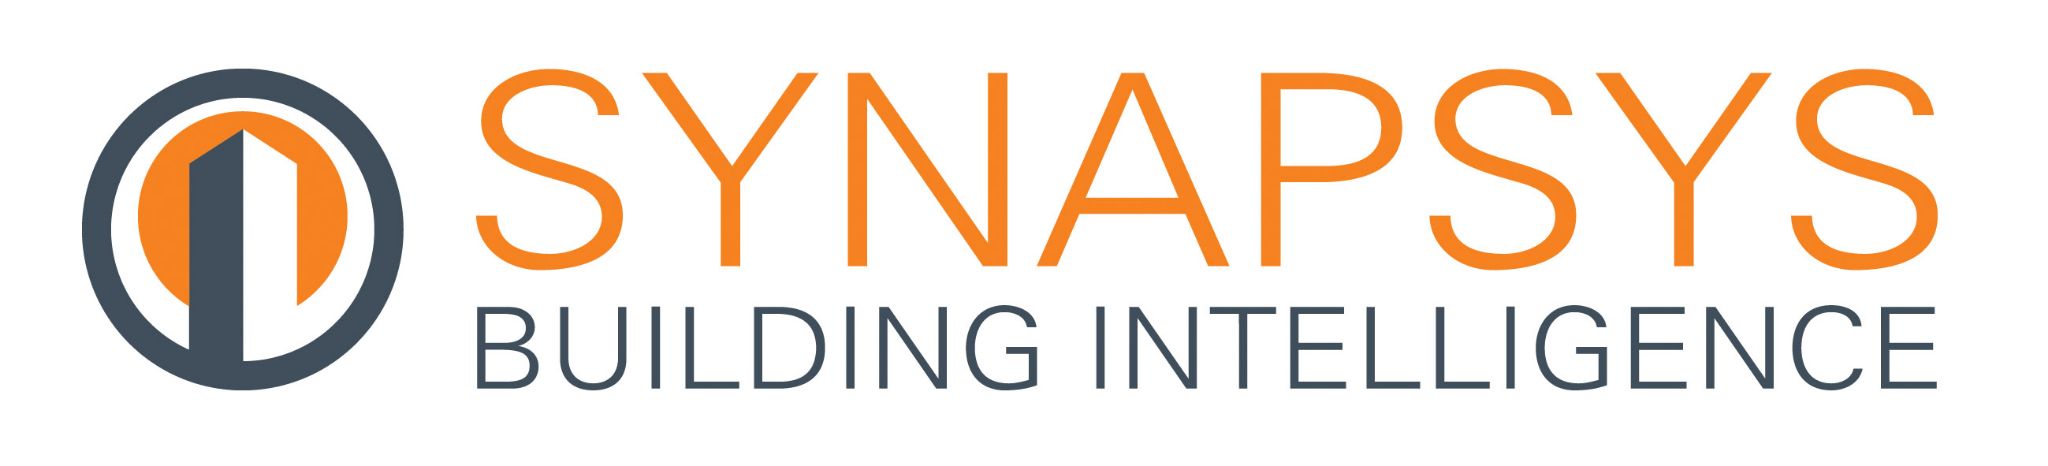 Easy interfacing from Synapsys Solutions